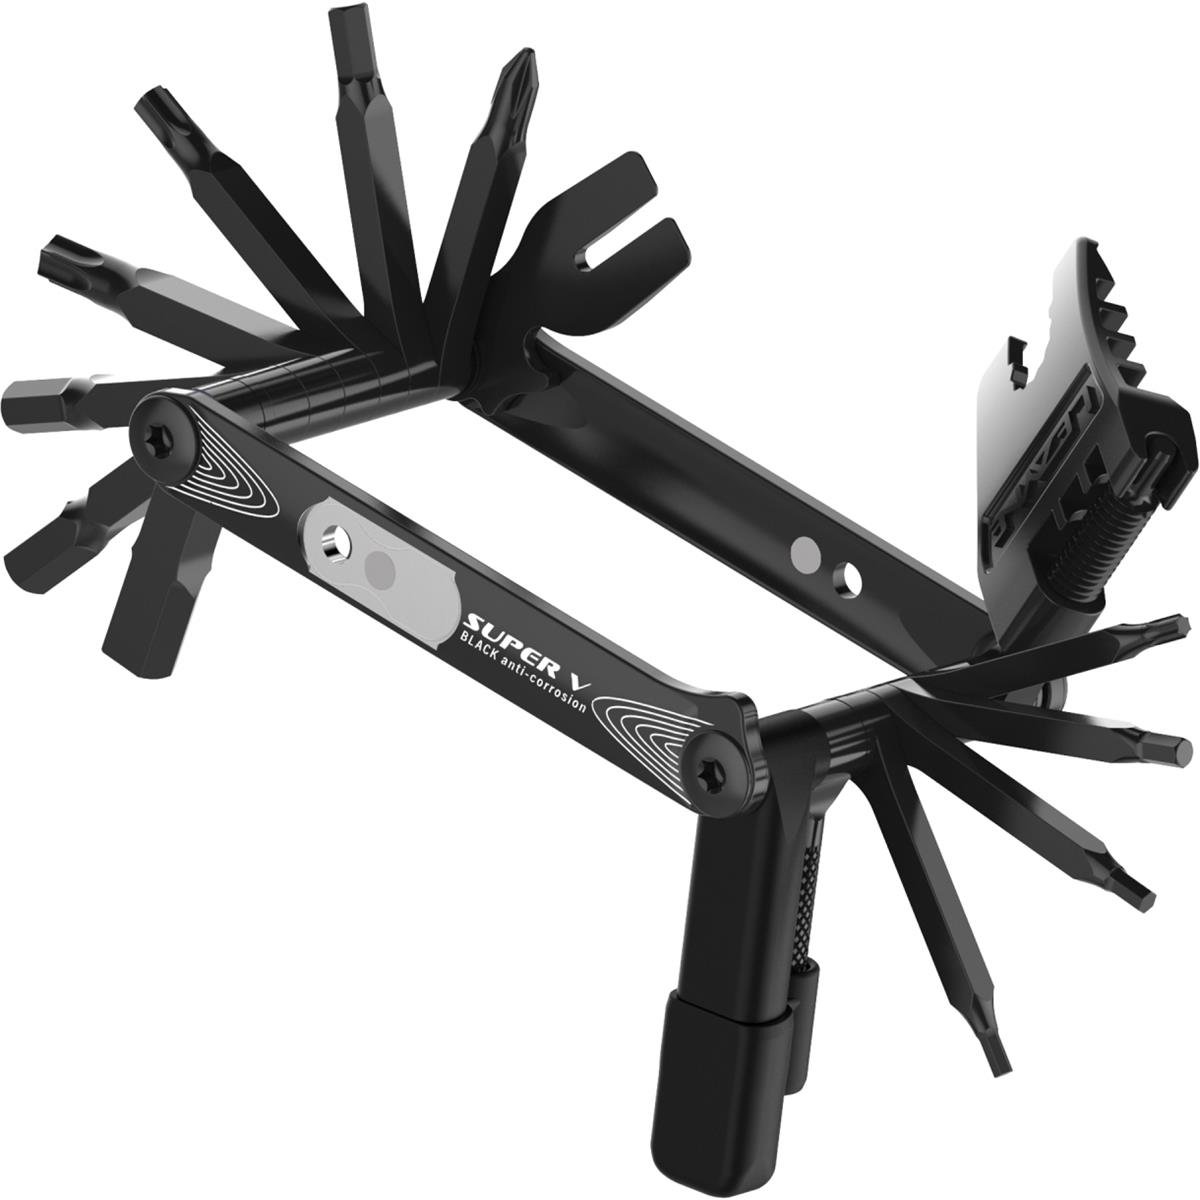 Lezyne Multitool Super V23 With 4 different functions